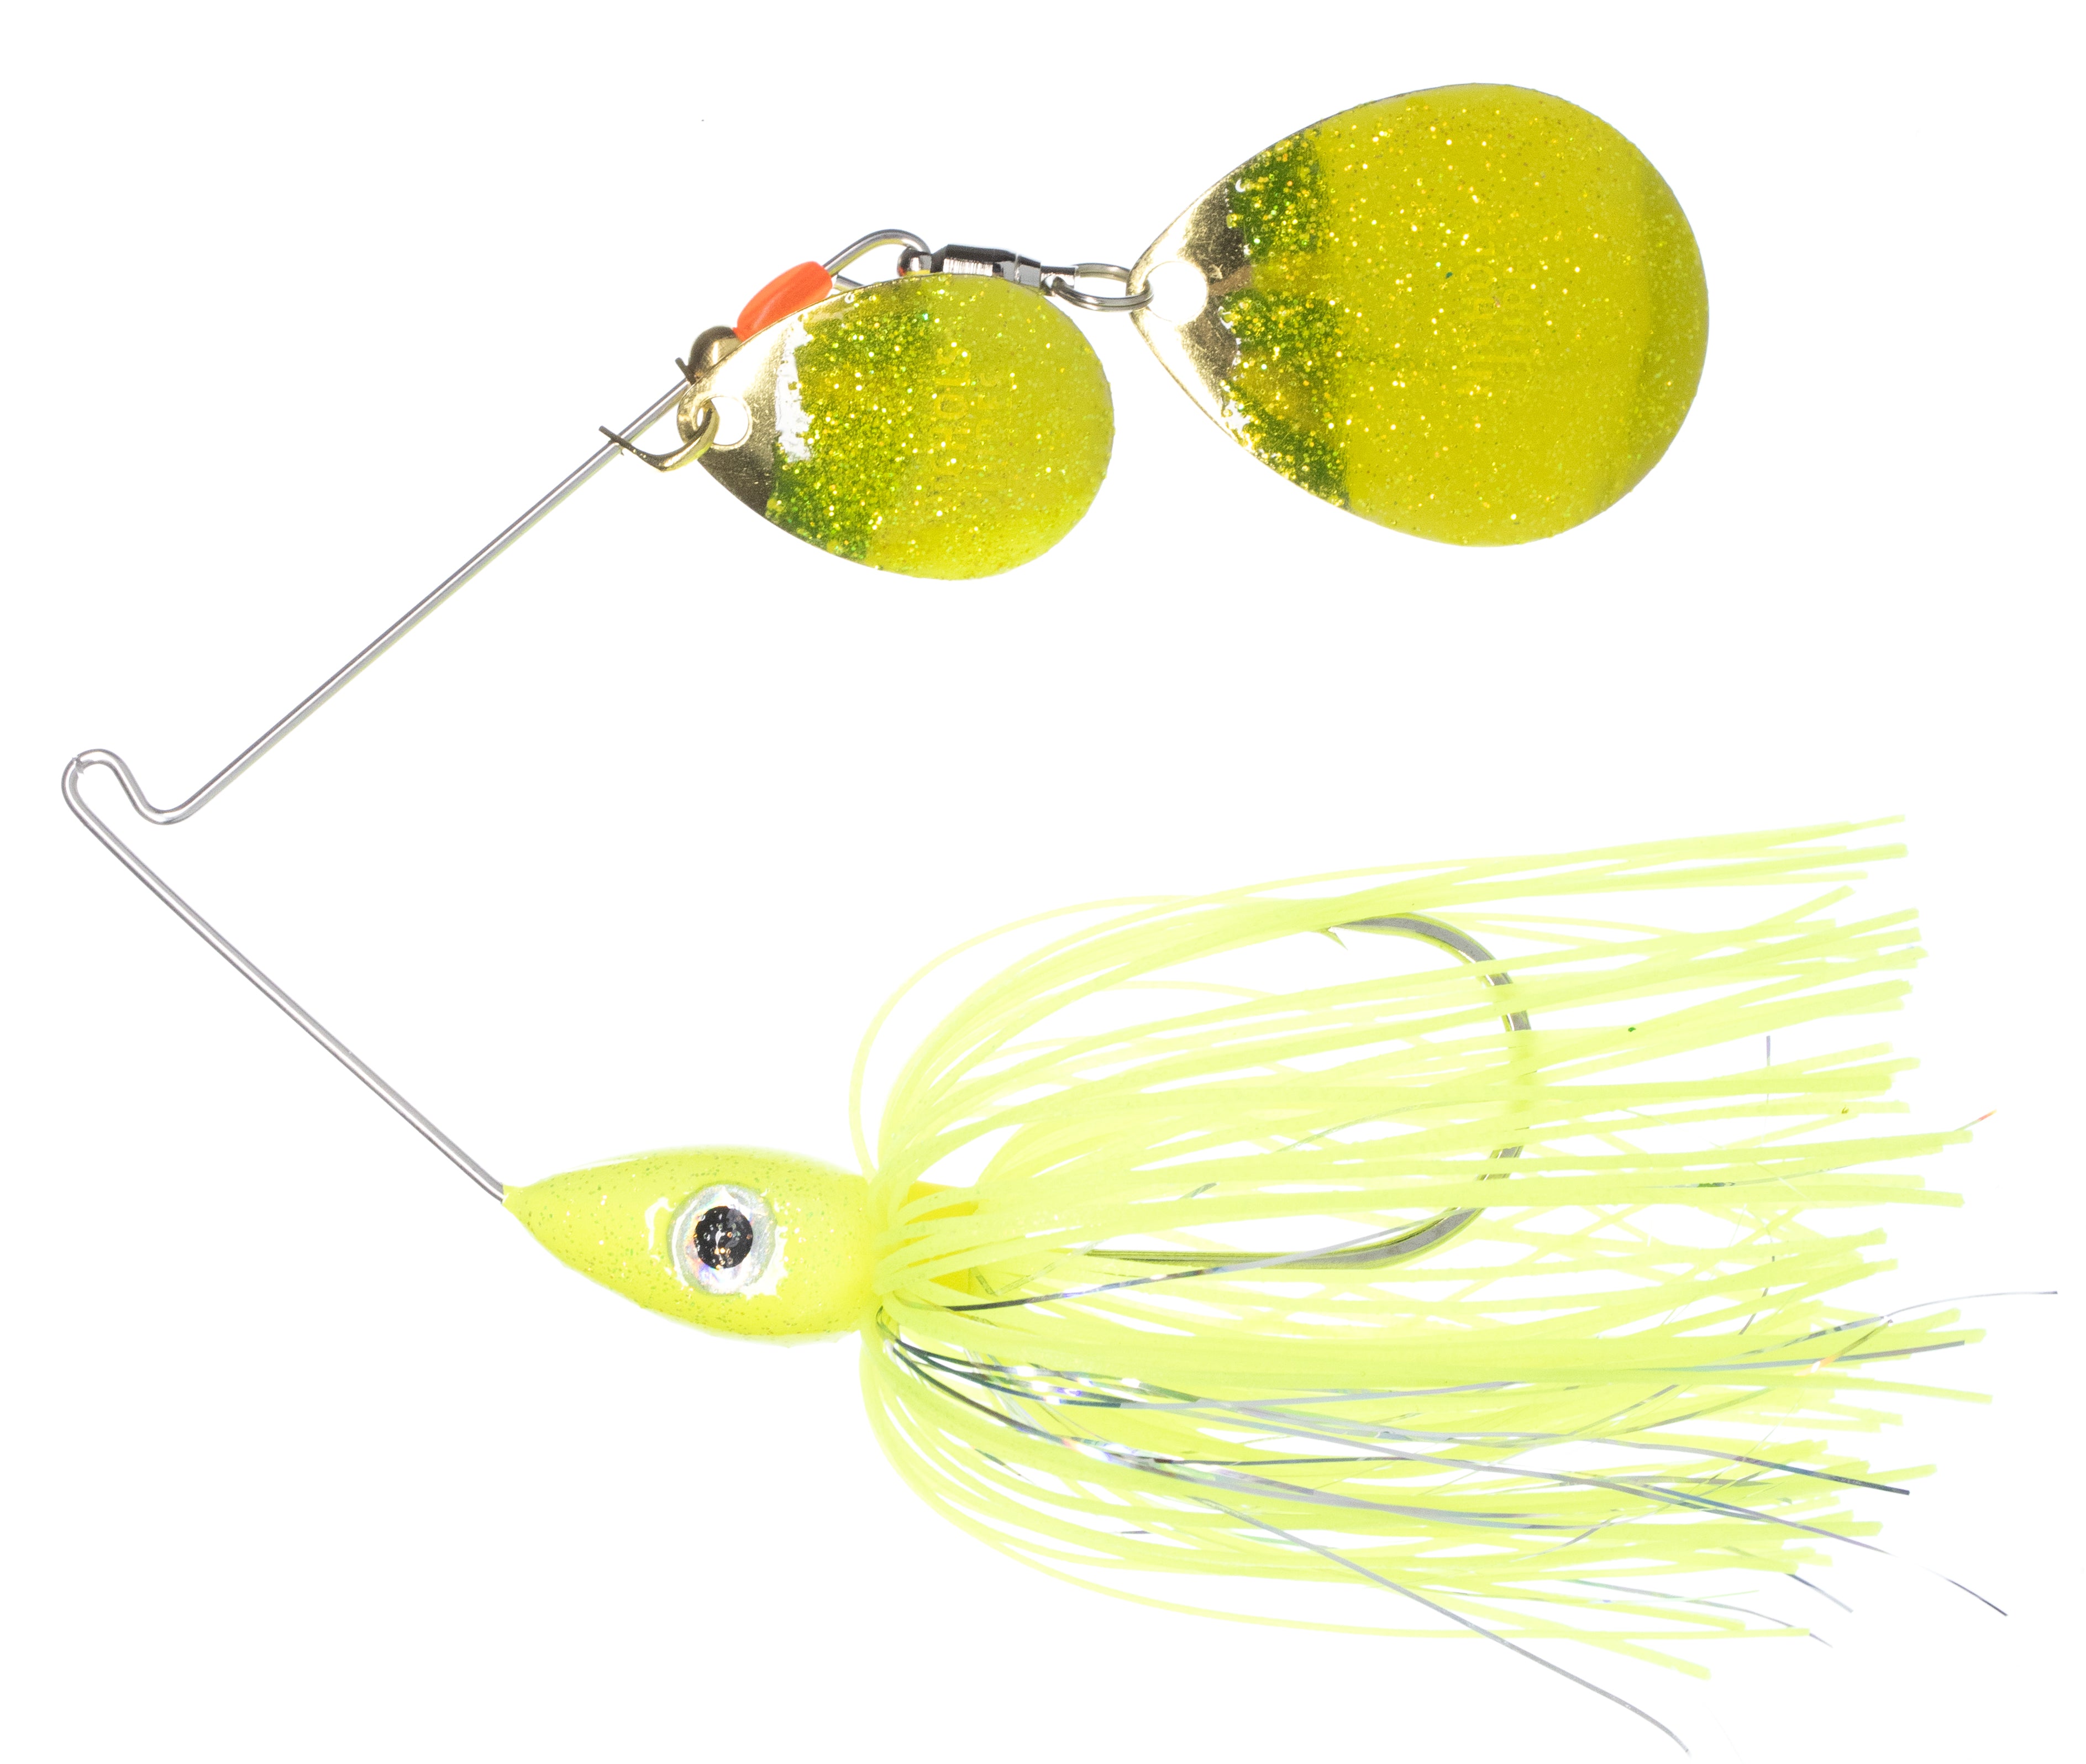 Nichols Lures, Pulsator, Metal Flake, Double Willow, Spinnerbait